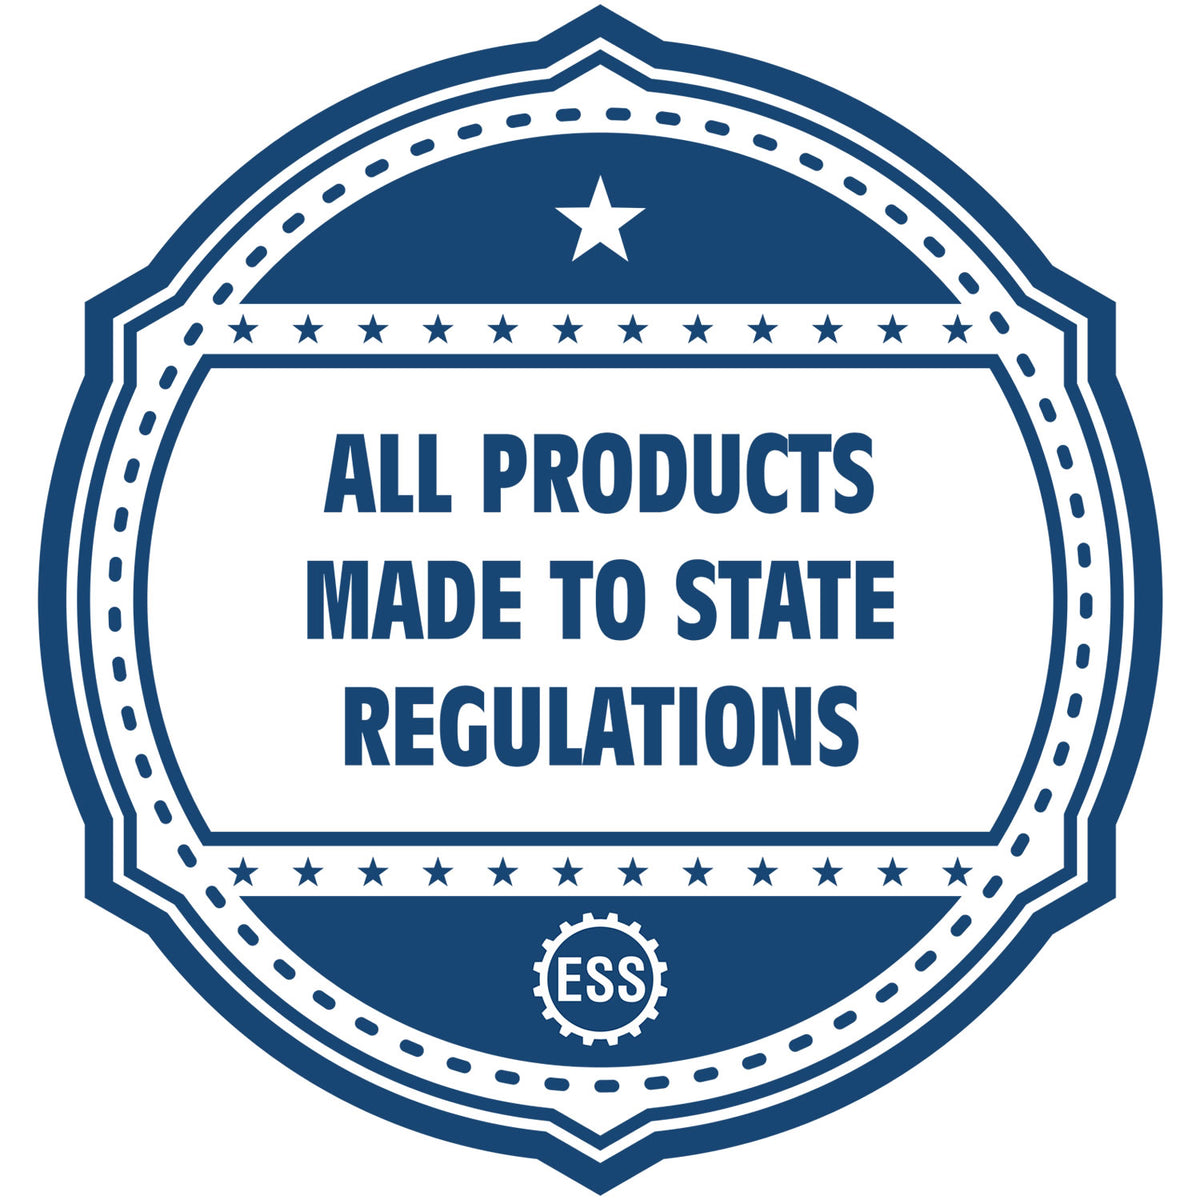 A blue icon or badge for the Heavy Duty Cast Iron New Hampshire Geologist Seal Embosser showing that this product is made in compliance with state regulations.